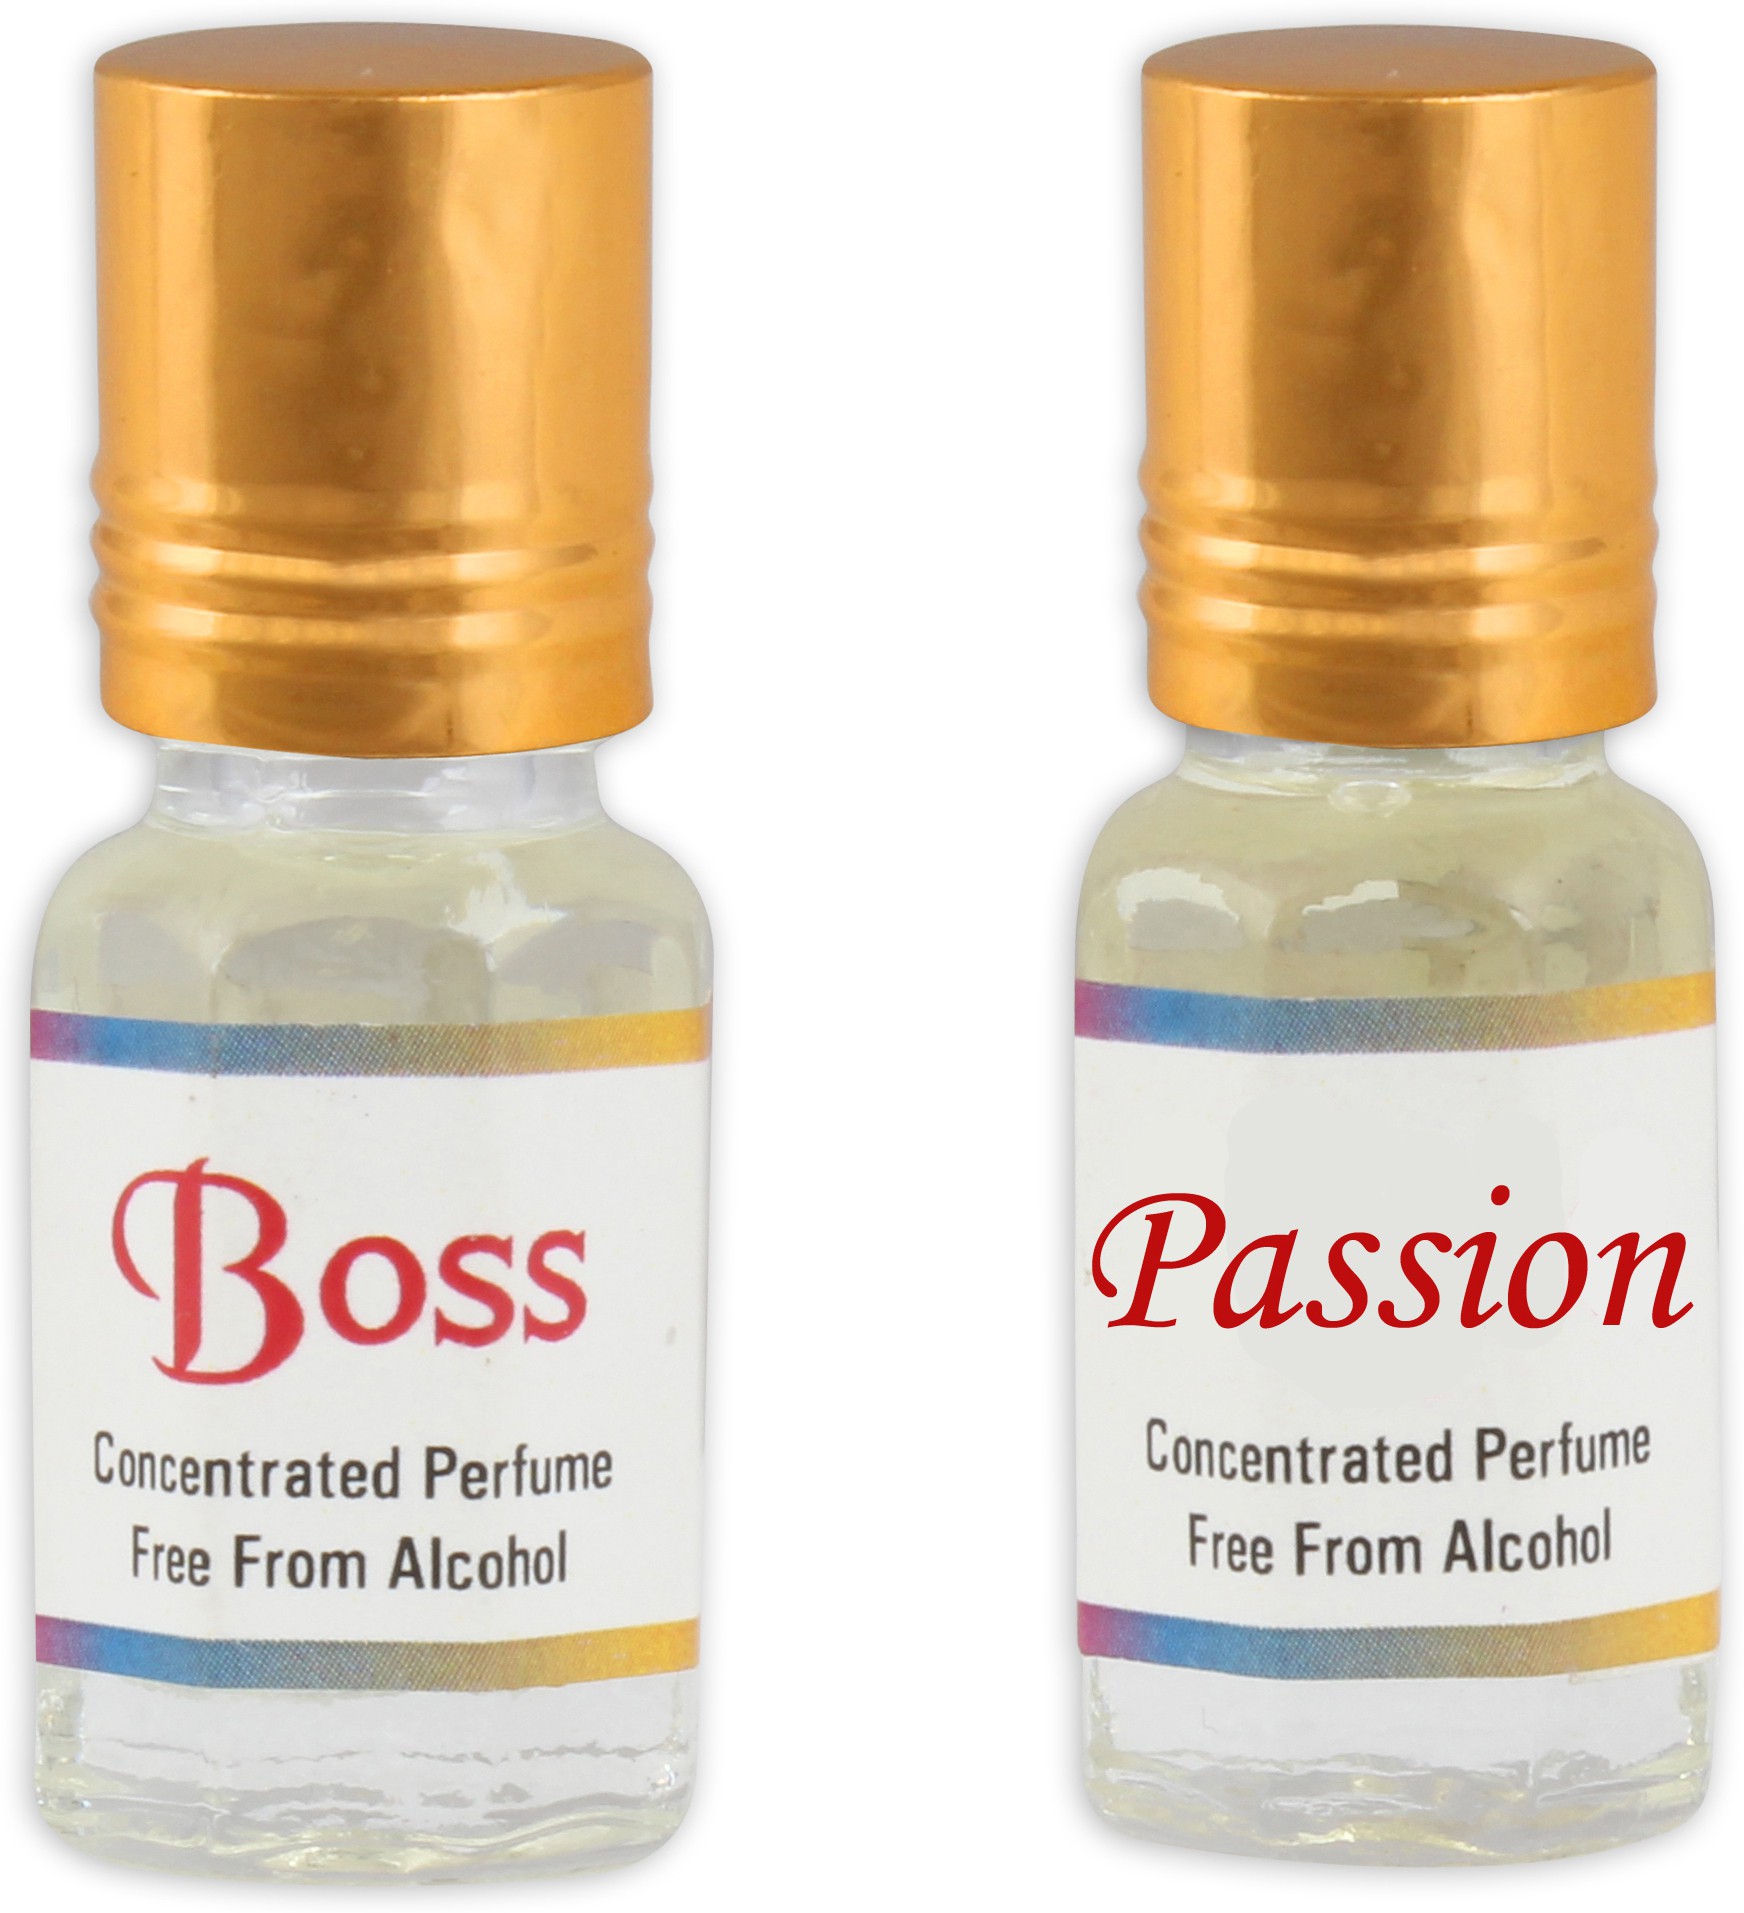 KHSA Boss + Passion Herbal Attar(Floral)